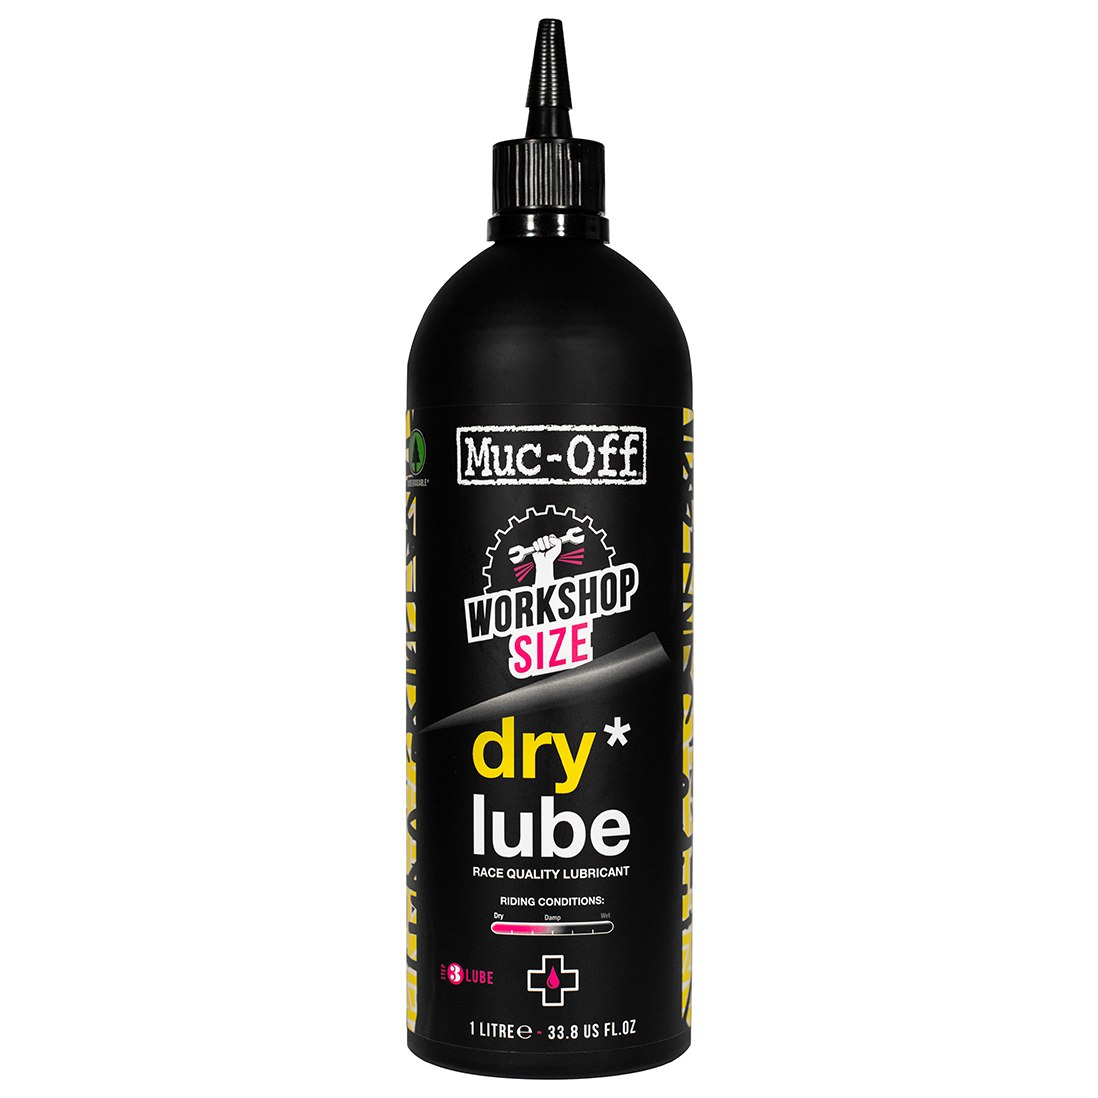 Picture of Muc-Off Dry Lube Lubricant - 1 Liter